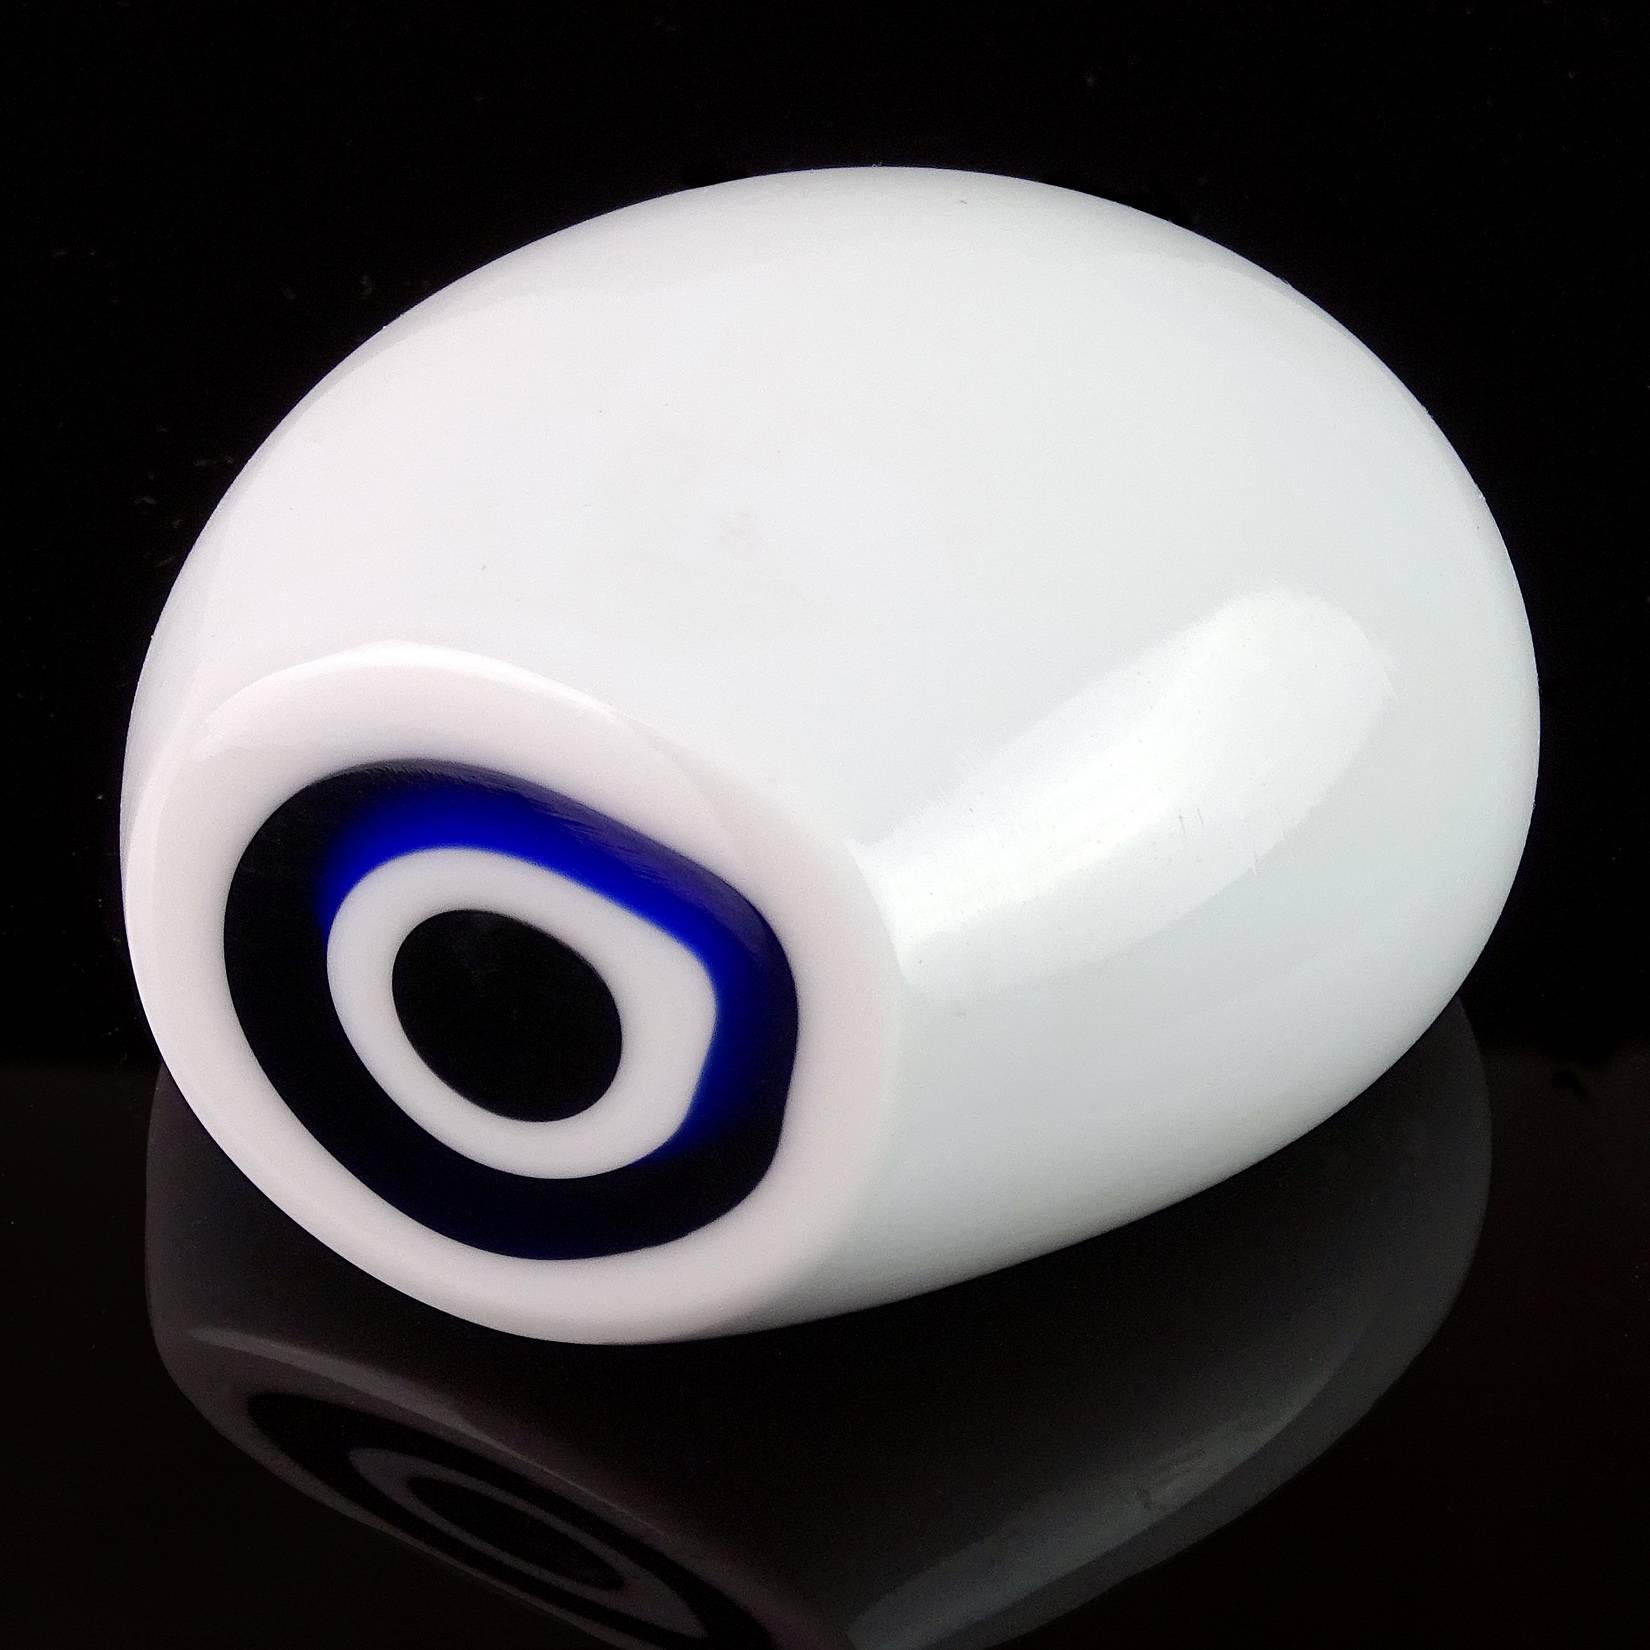 Rare Murano hand blown white, blue and black Italian art glass bullseye paperweight. Documented to the Vistosi company. The piece is made to look like a cut geode rock, with 4 layers of glass. Measures 3 1/4" long x 2" high. 
